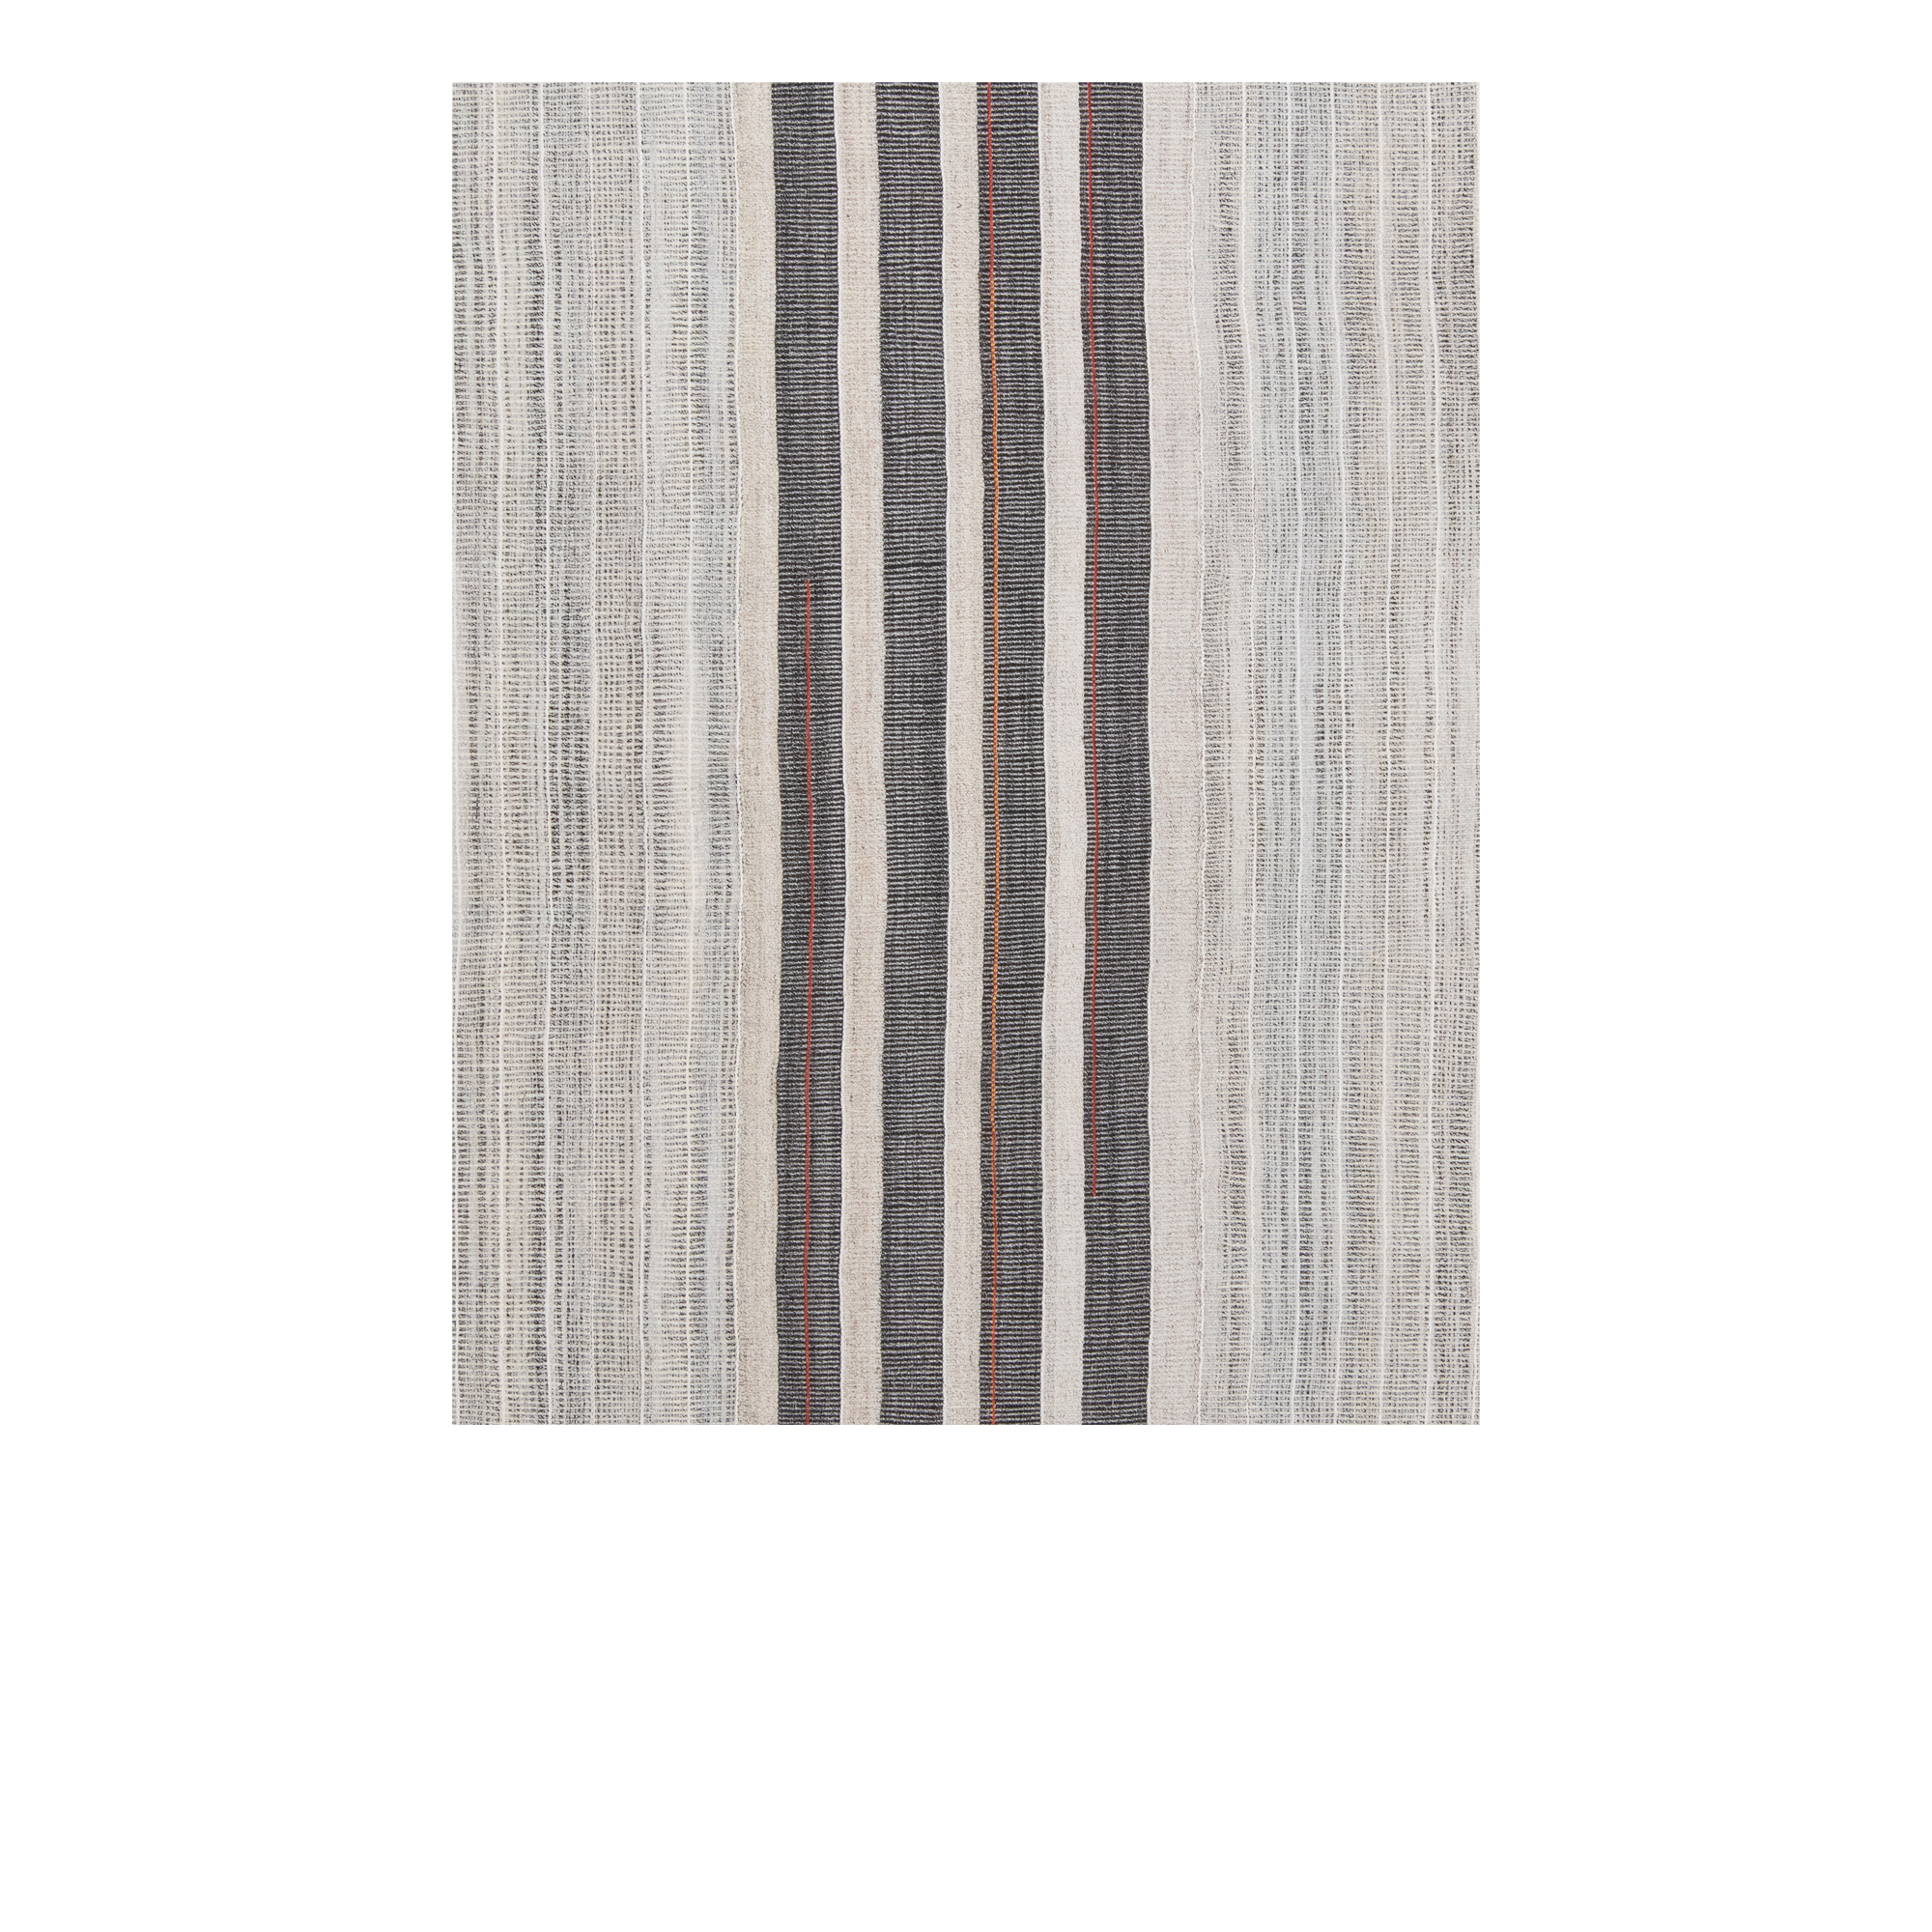 This charmo flatweave, antique rug is made from handspun wool and natural dyes. 